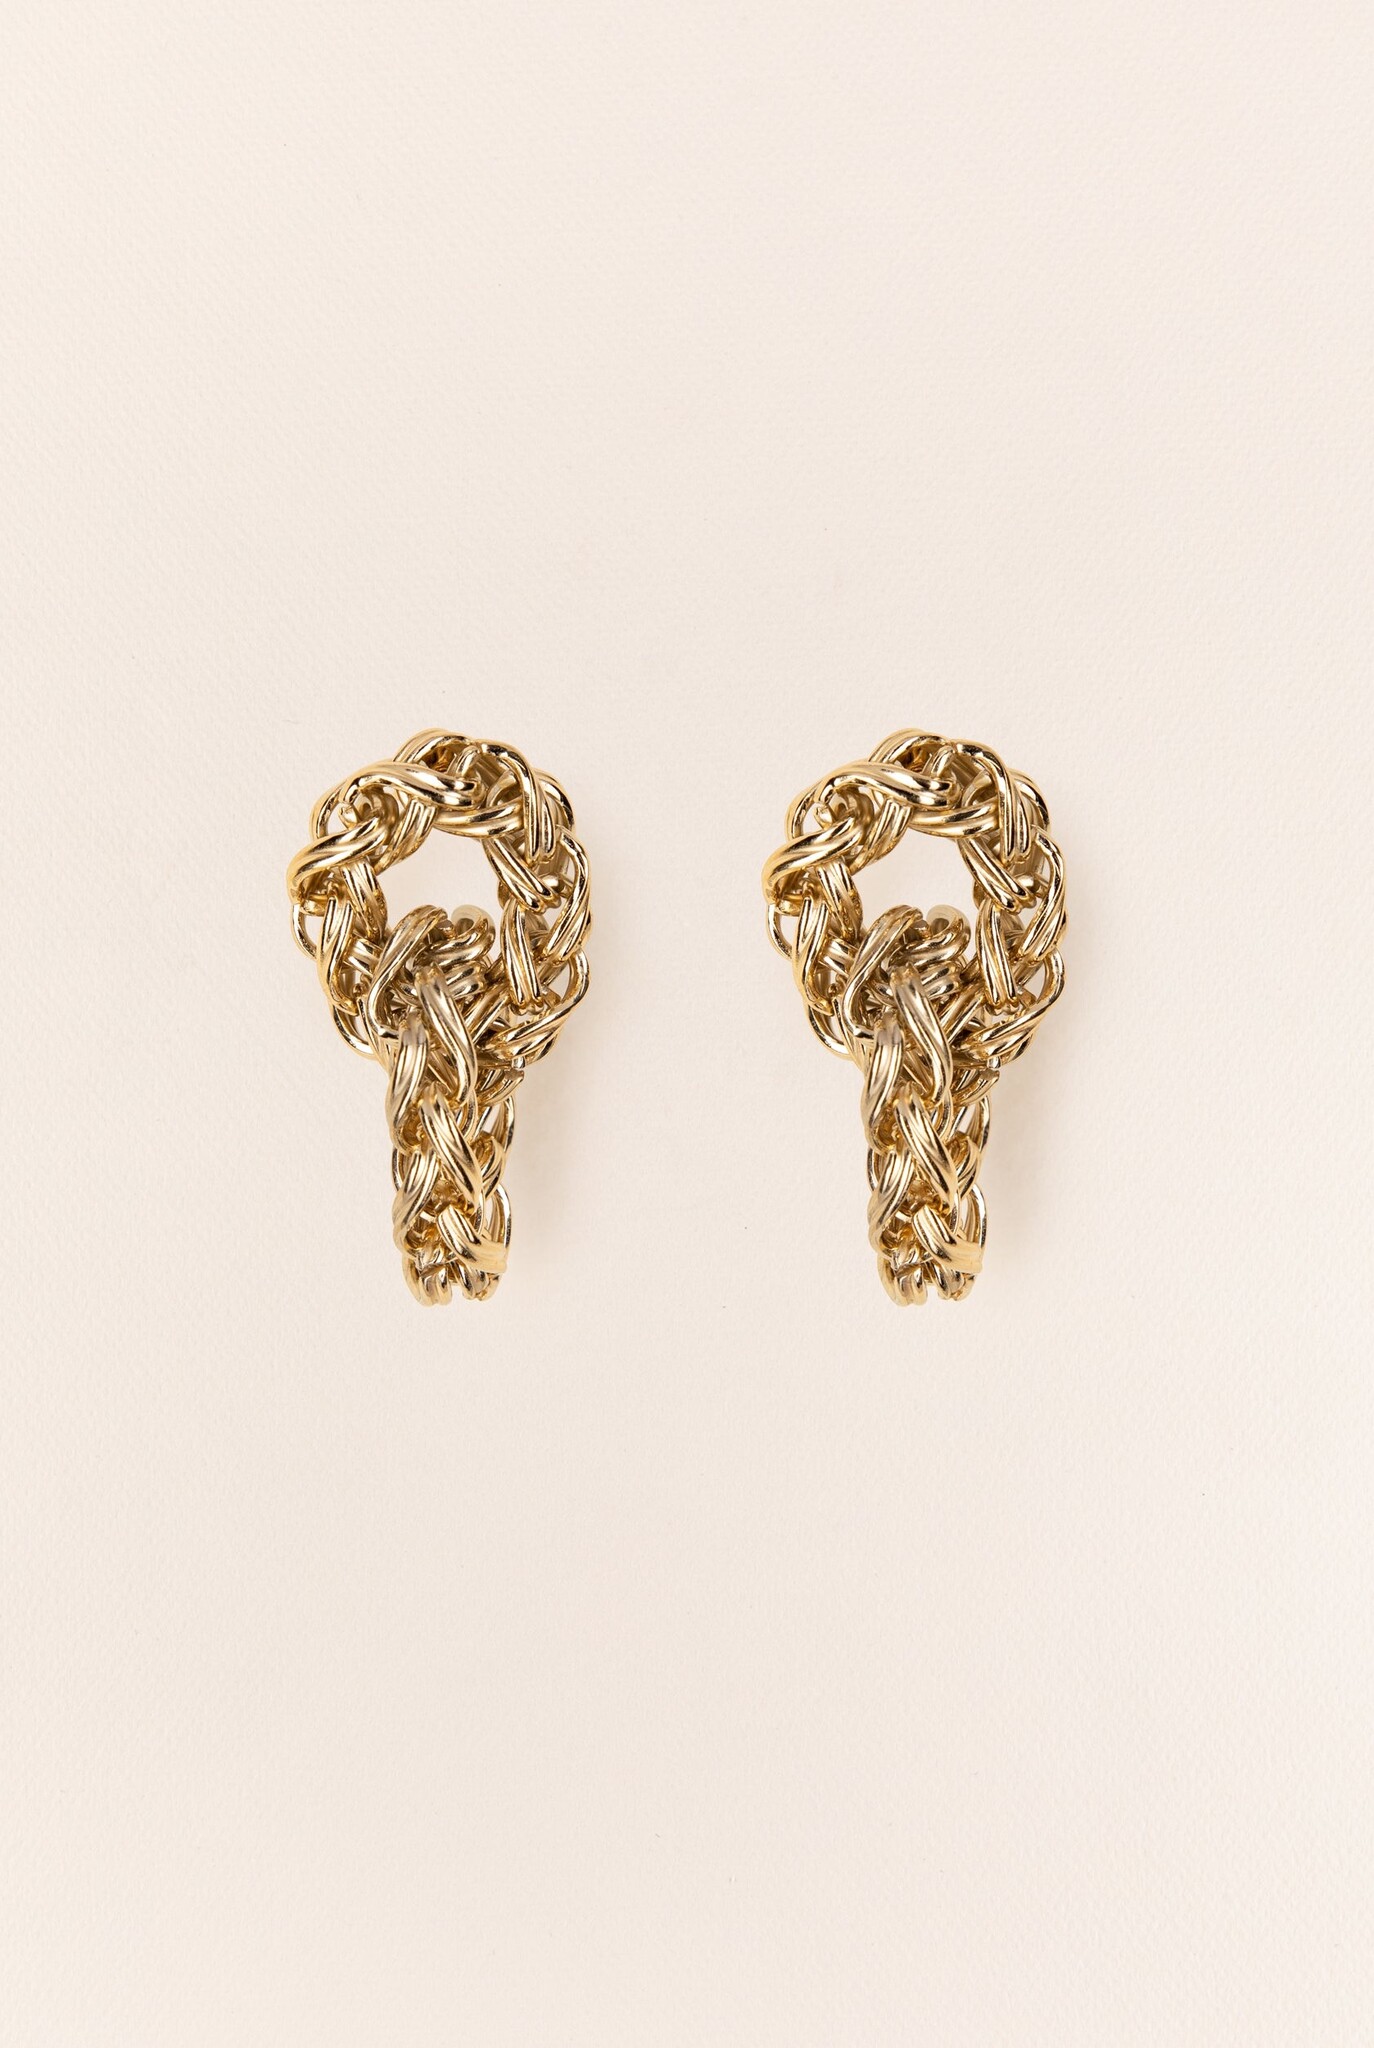 Pendant post earrings with chained hoops in gold-plated